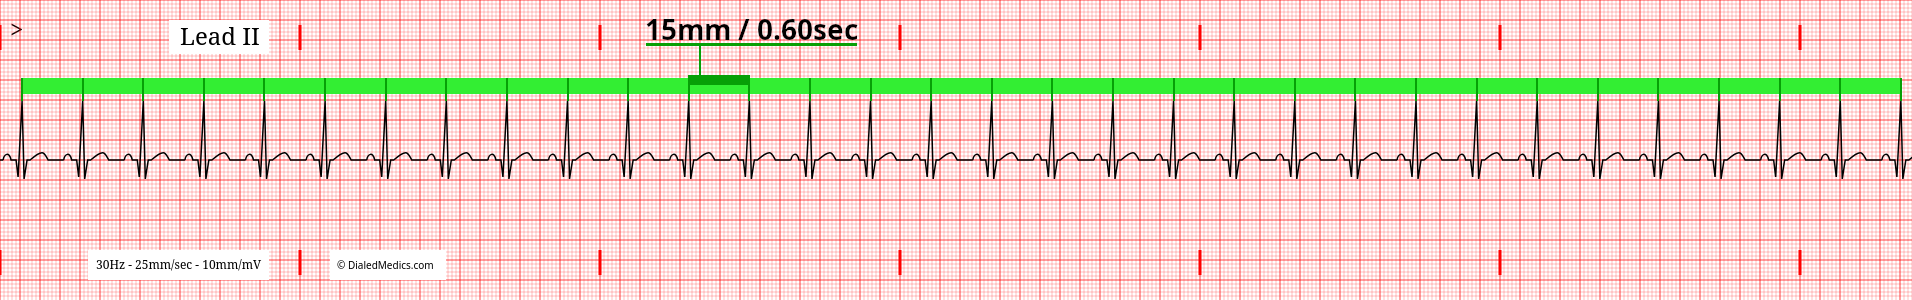 Software generated EKG tracing of a Normal Sinus Rhythm at 99bpm with R-R Interval of 15mm / 0.60sec marked.